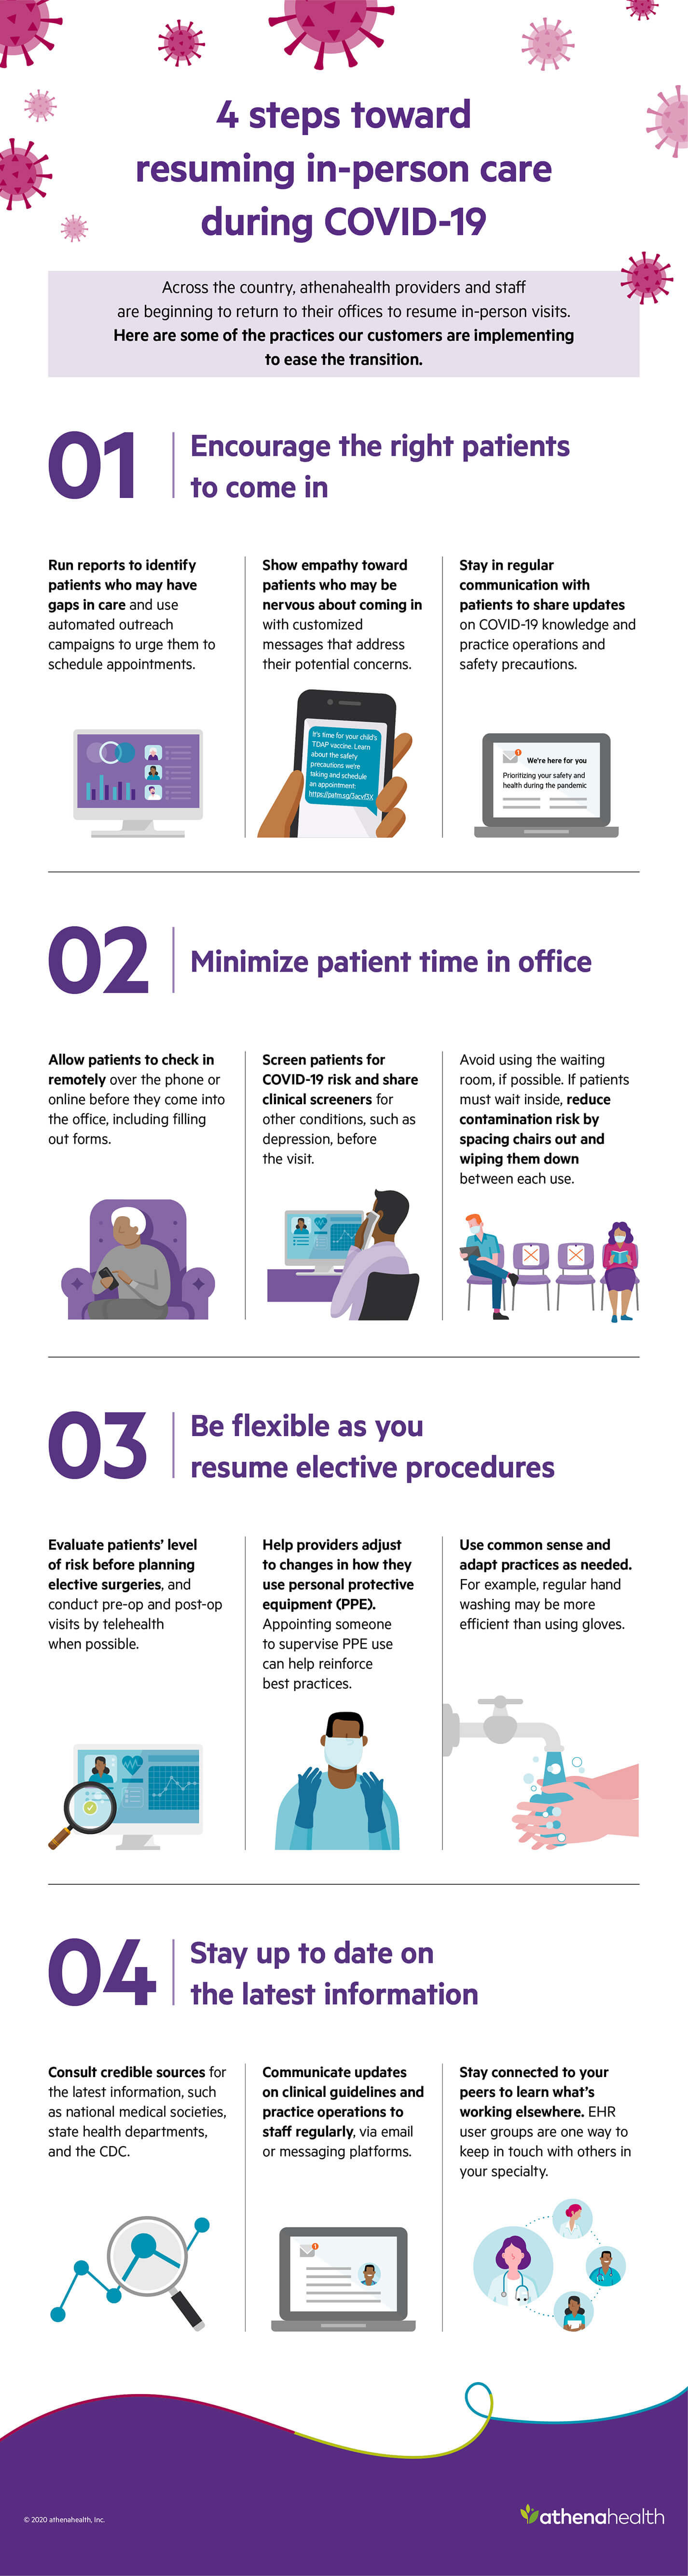 athenahealth infographic about resuming in-person care post-Covid